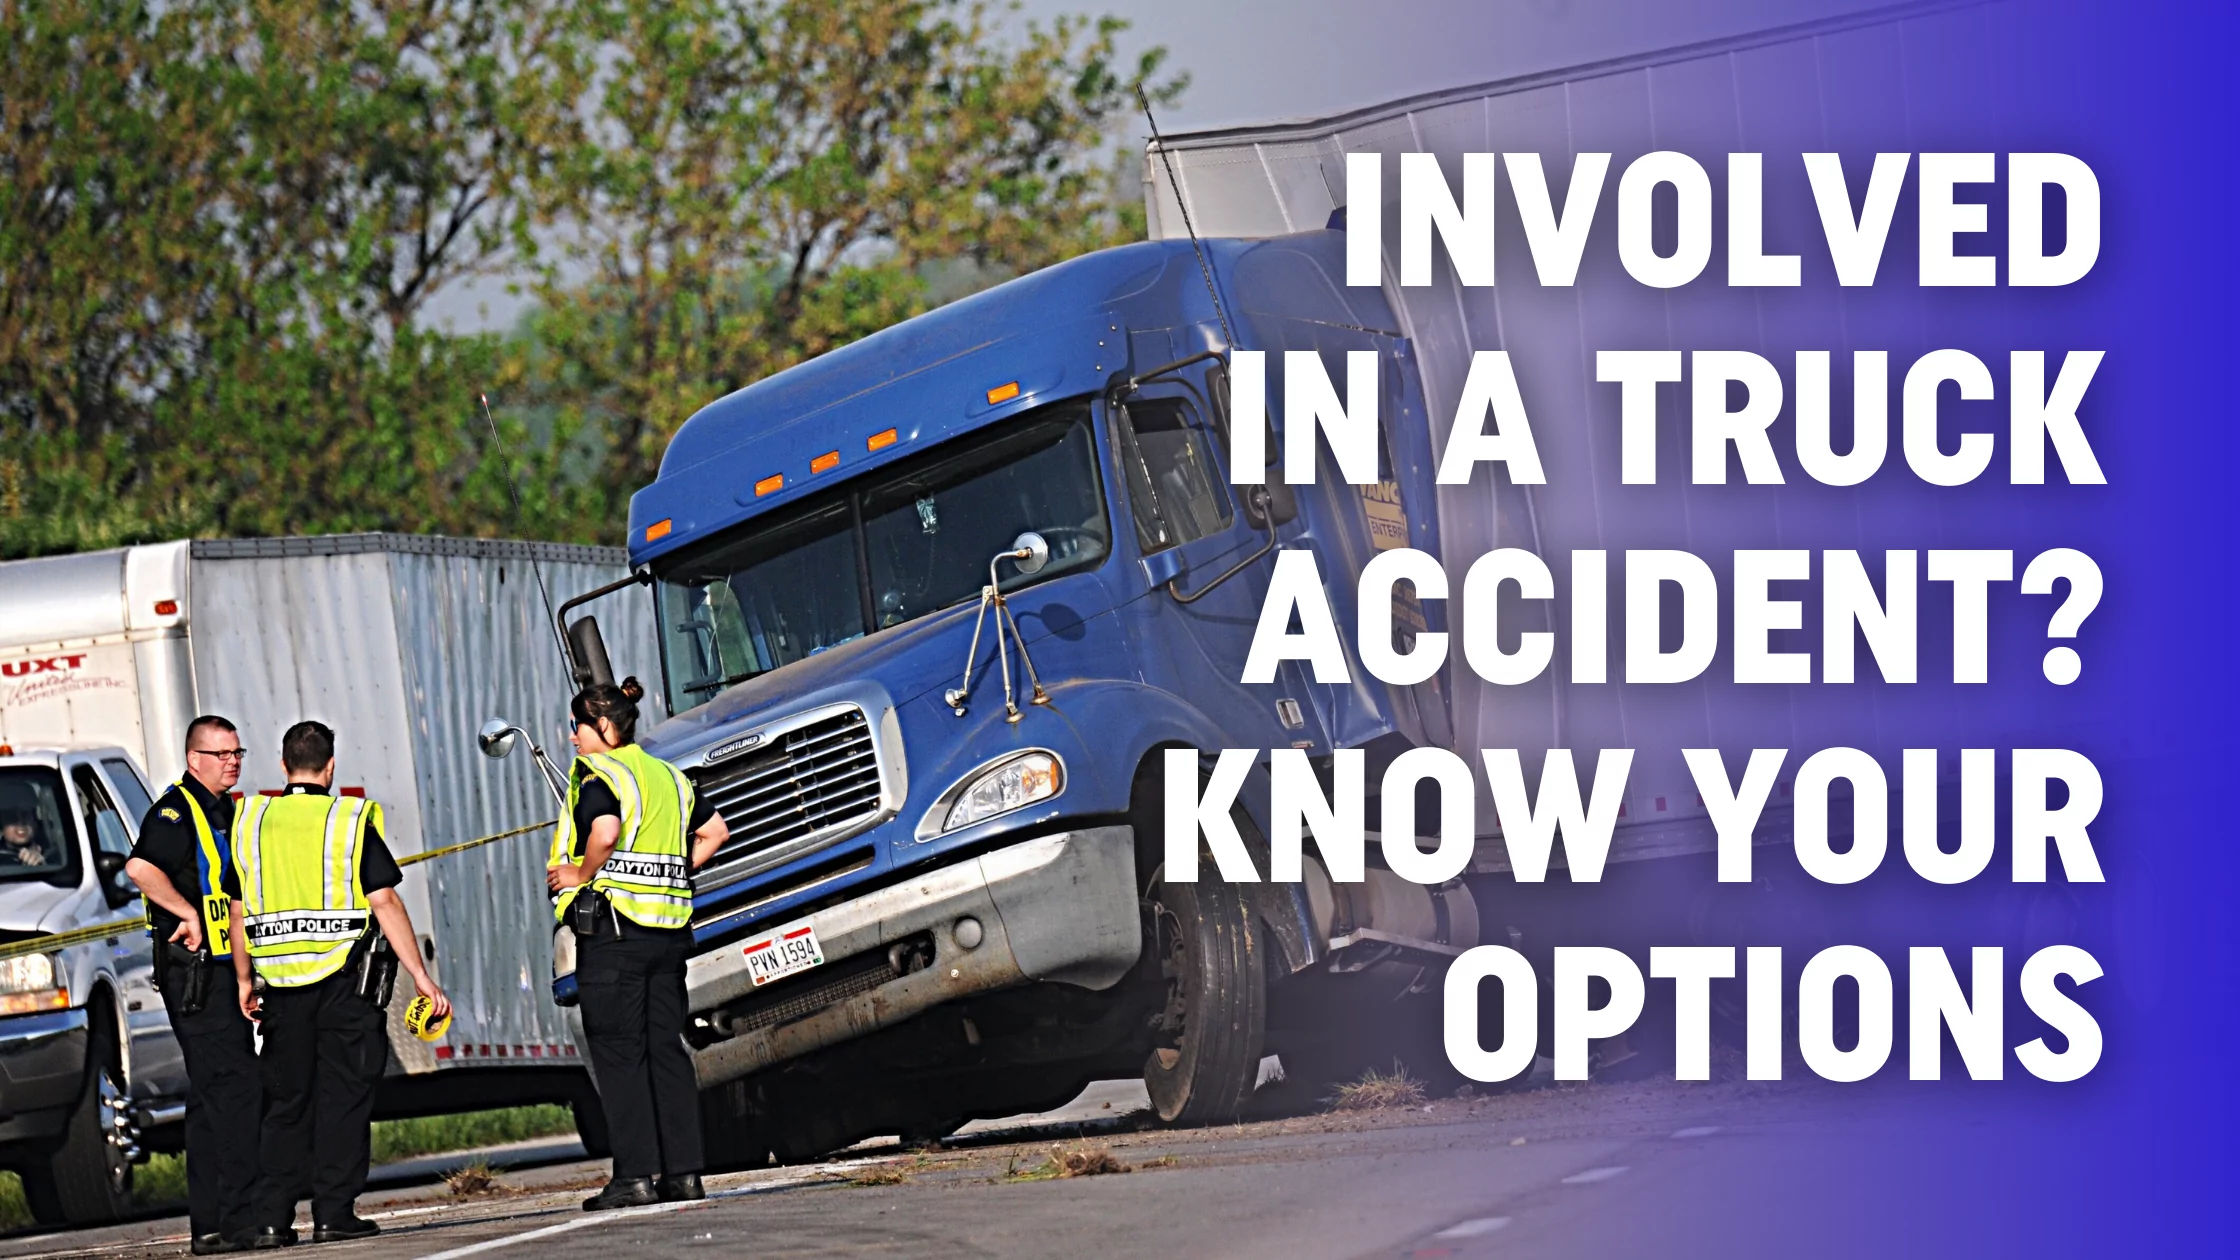 Involved in a Truck accident? Know your Options